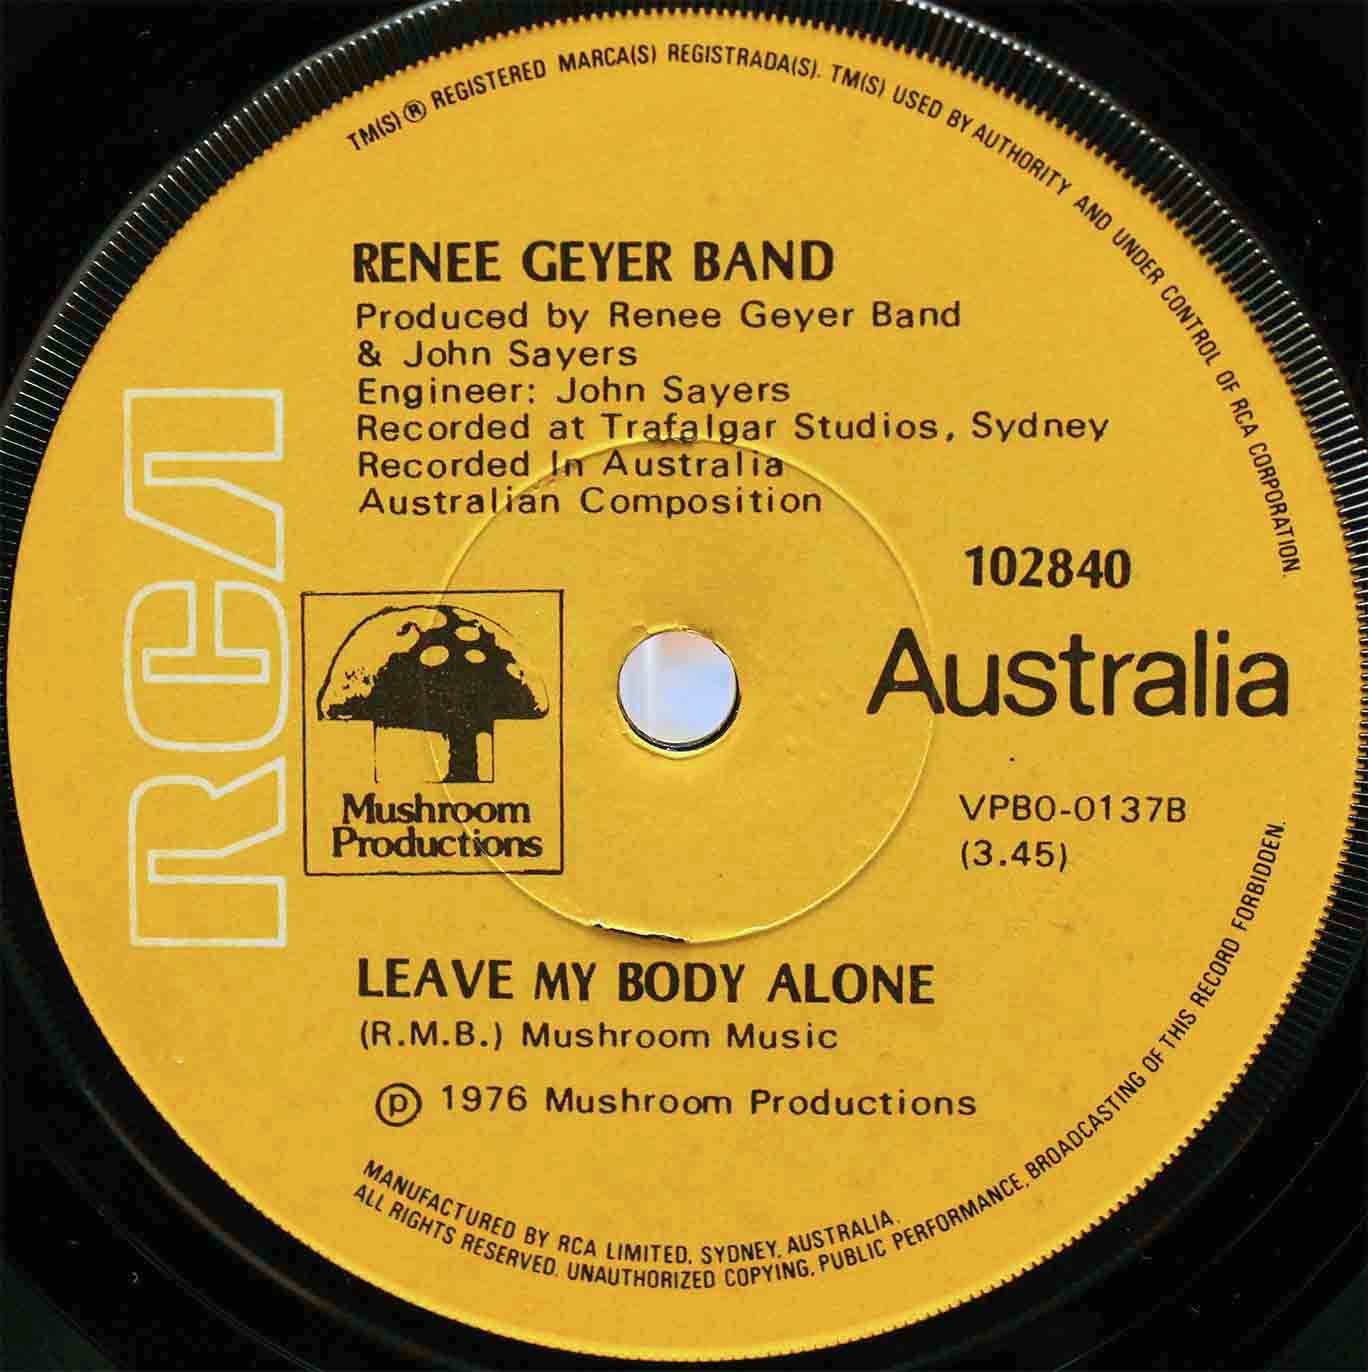 Renee Geyer Band (1976) – Leave My Body Alone 02